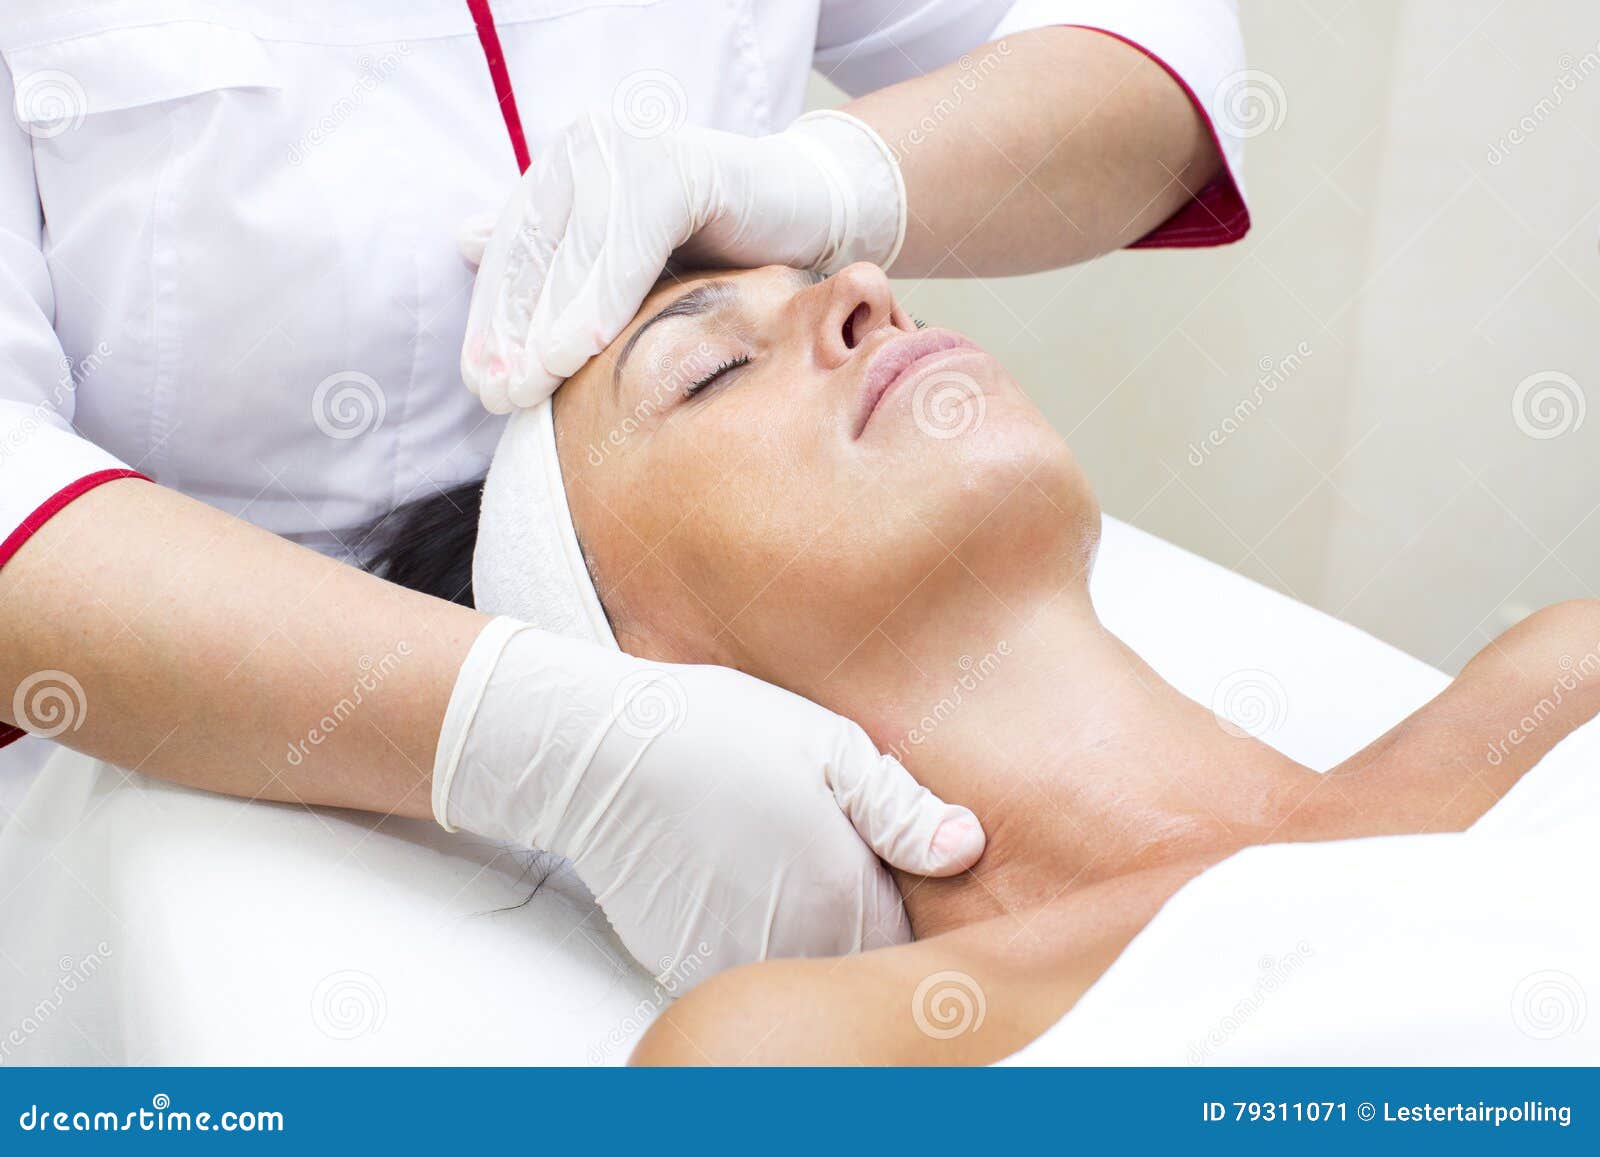 Process Of Massage And Facials Stock Image Image Of Healthy Cure 79311071